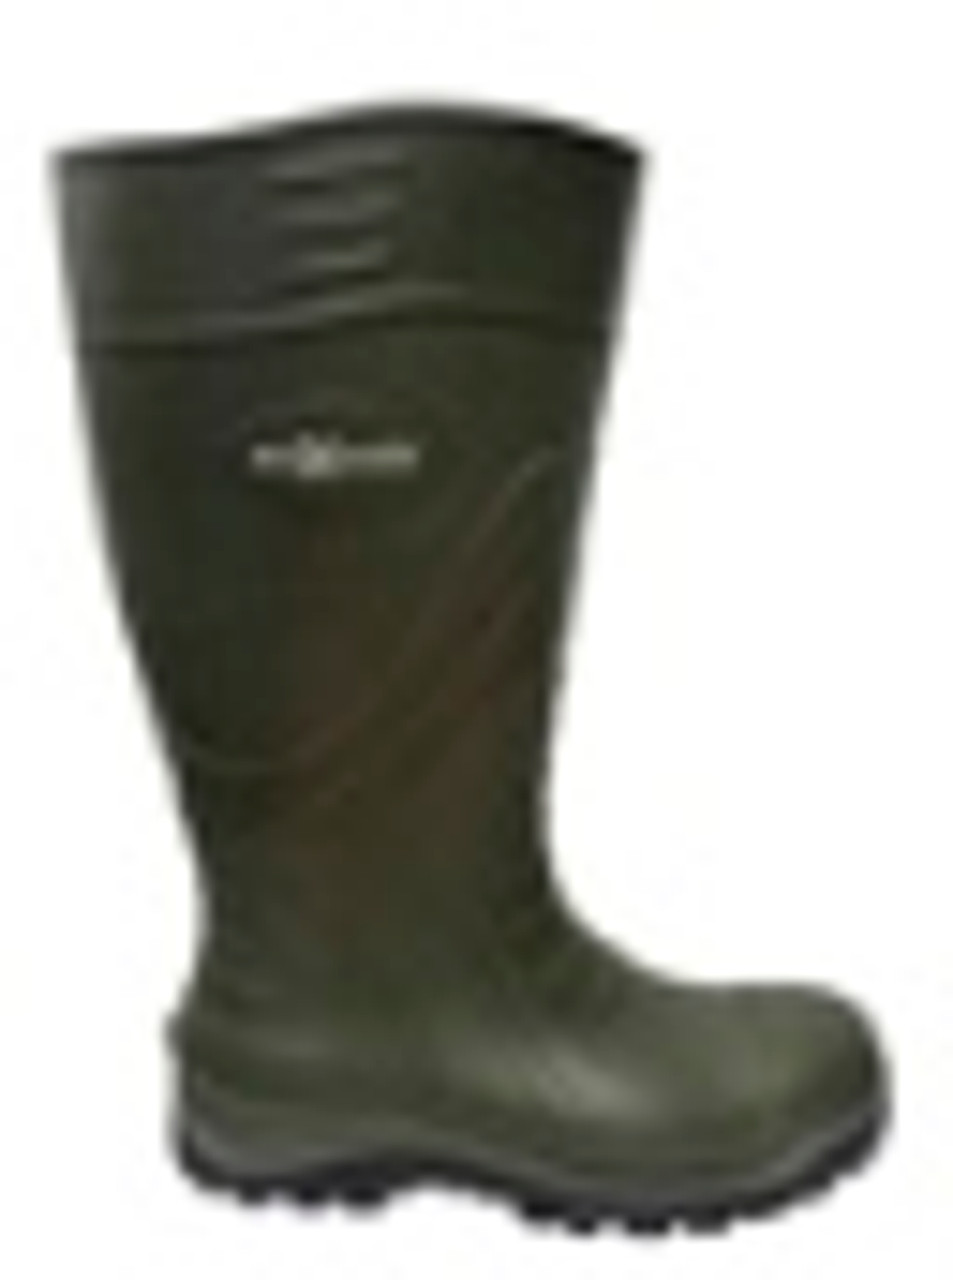 Patrol Green Pu Boot W/ Safety Toe, Size 9